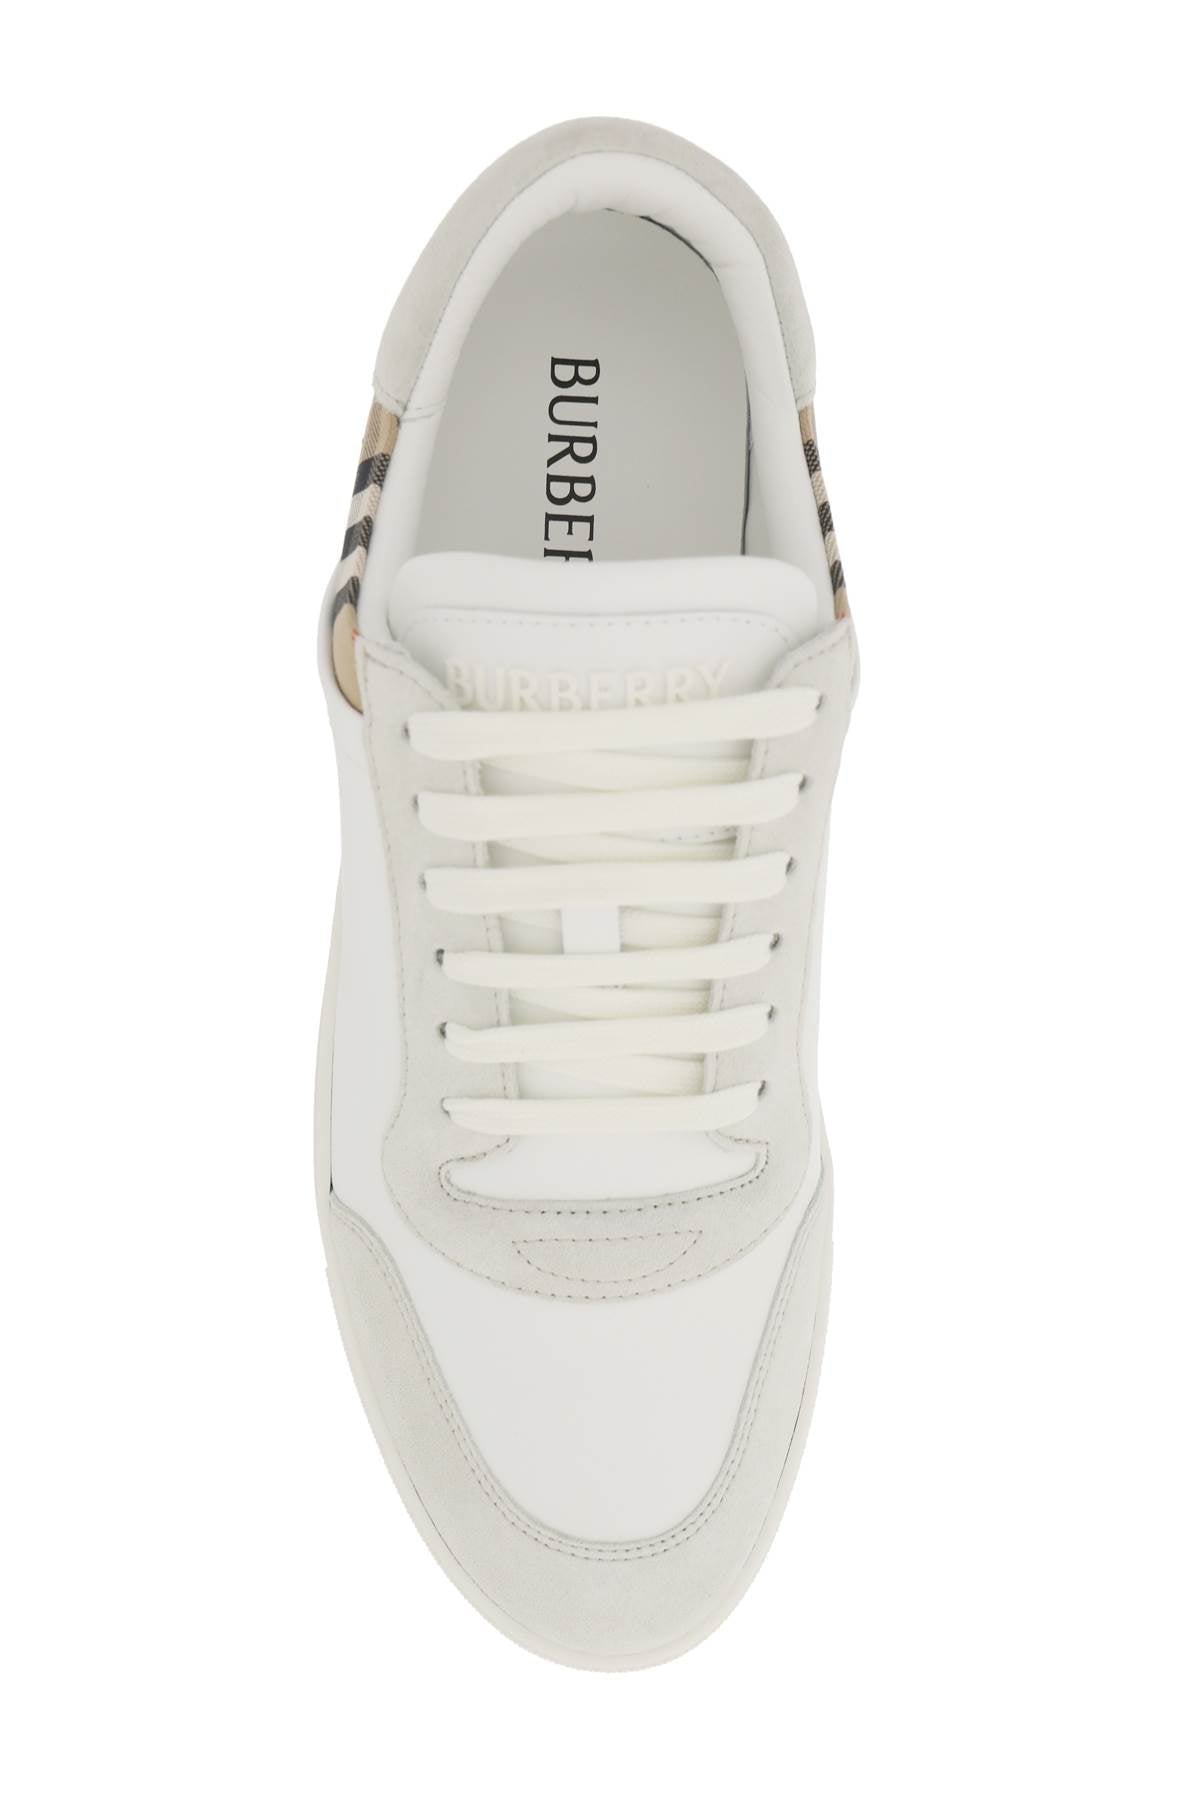 Burberry Check Leather Sneakers-Burberry-Urbanheer